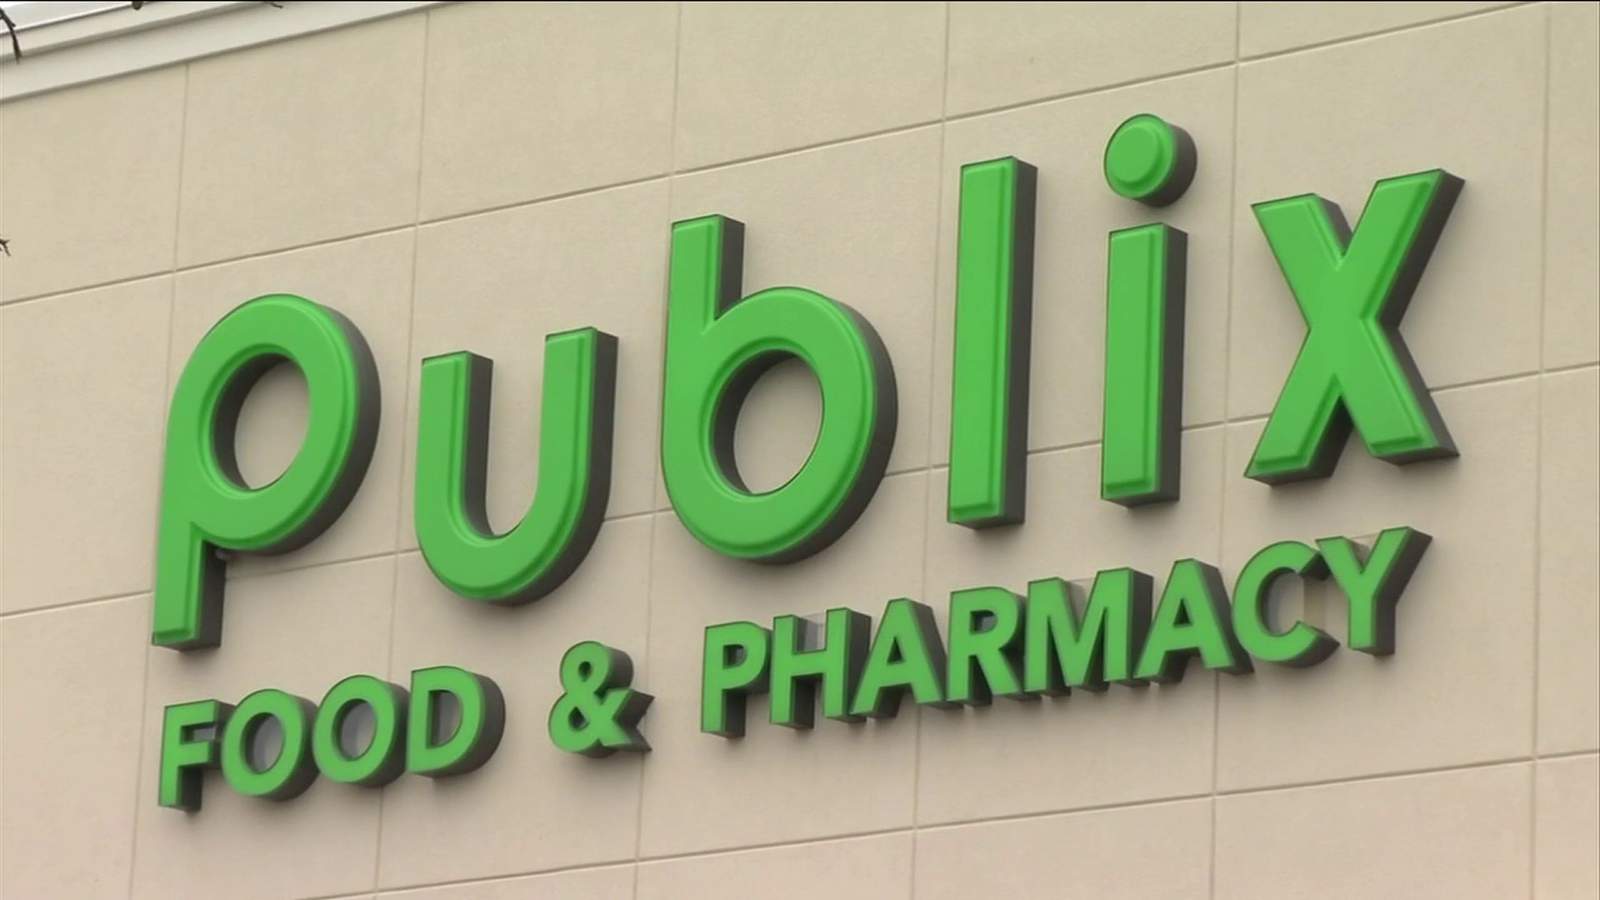 Publix recalls 5 products containing this ingredient